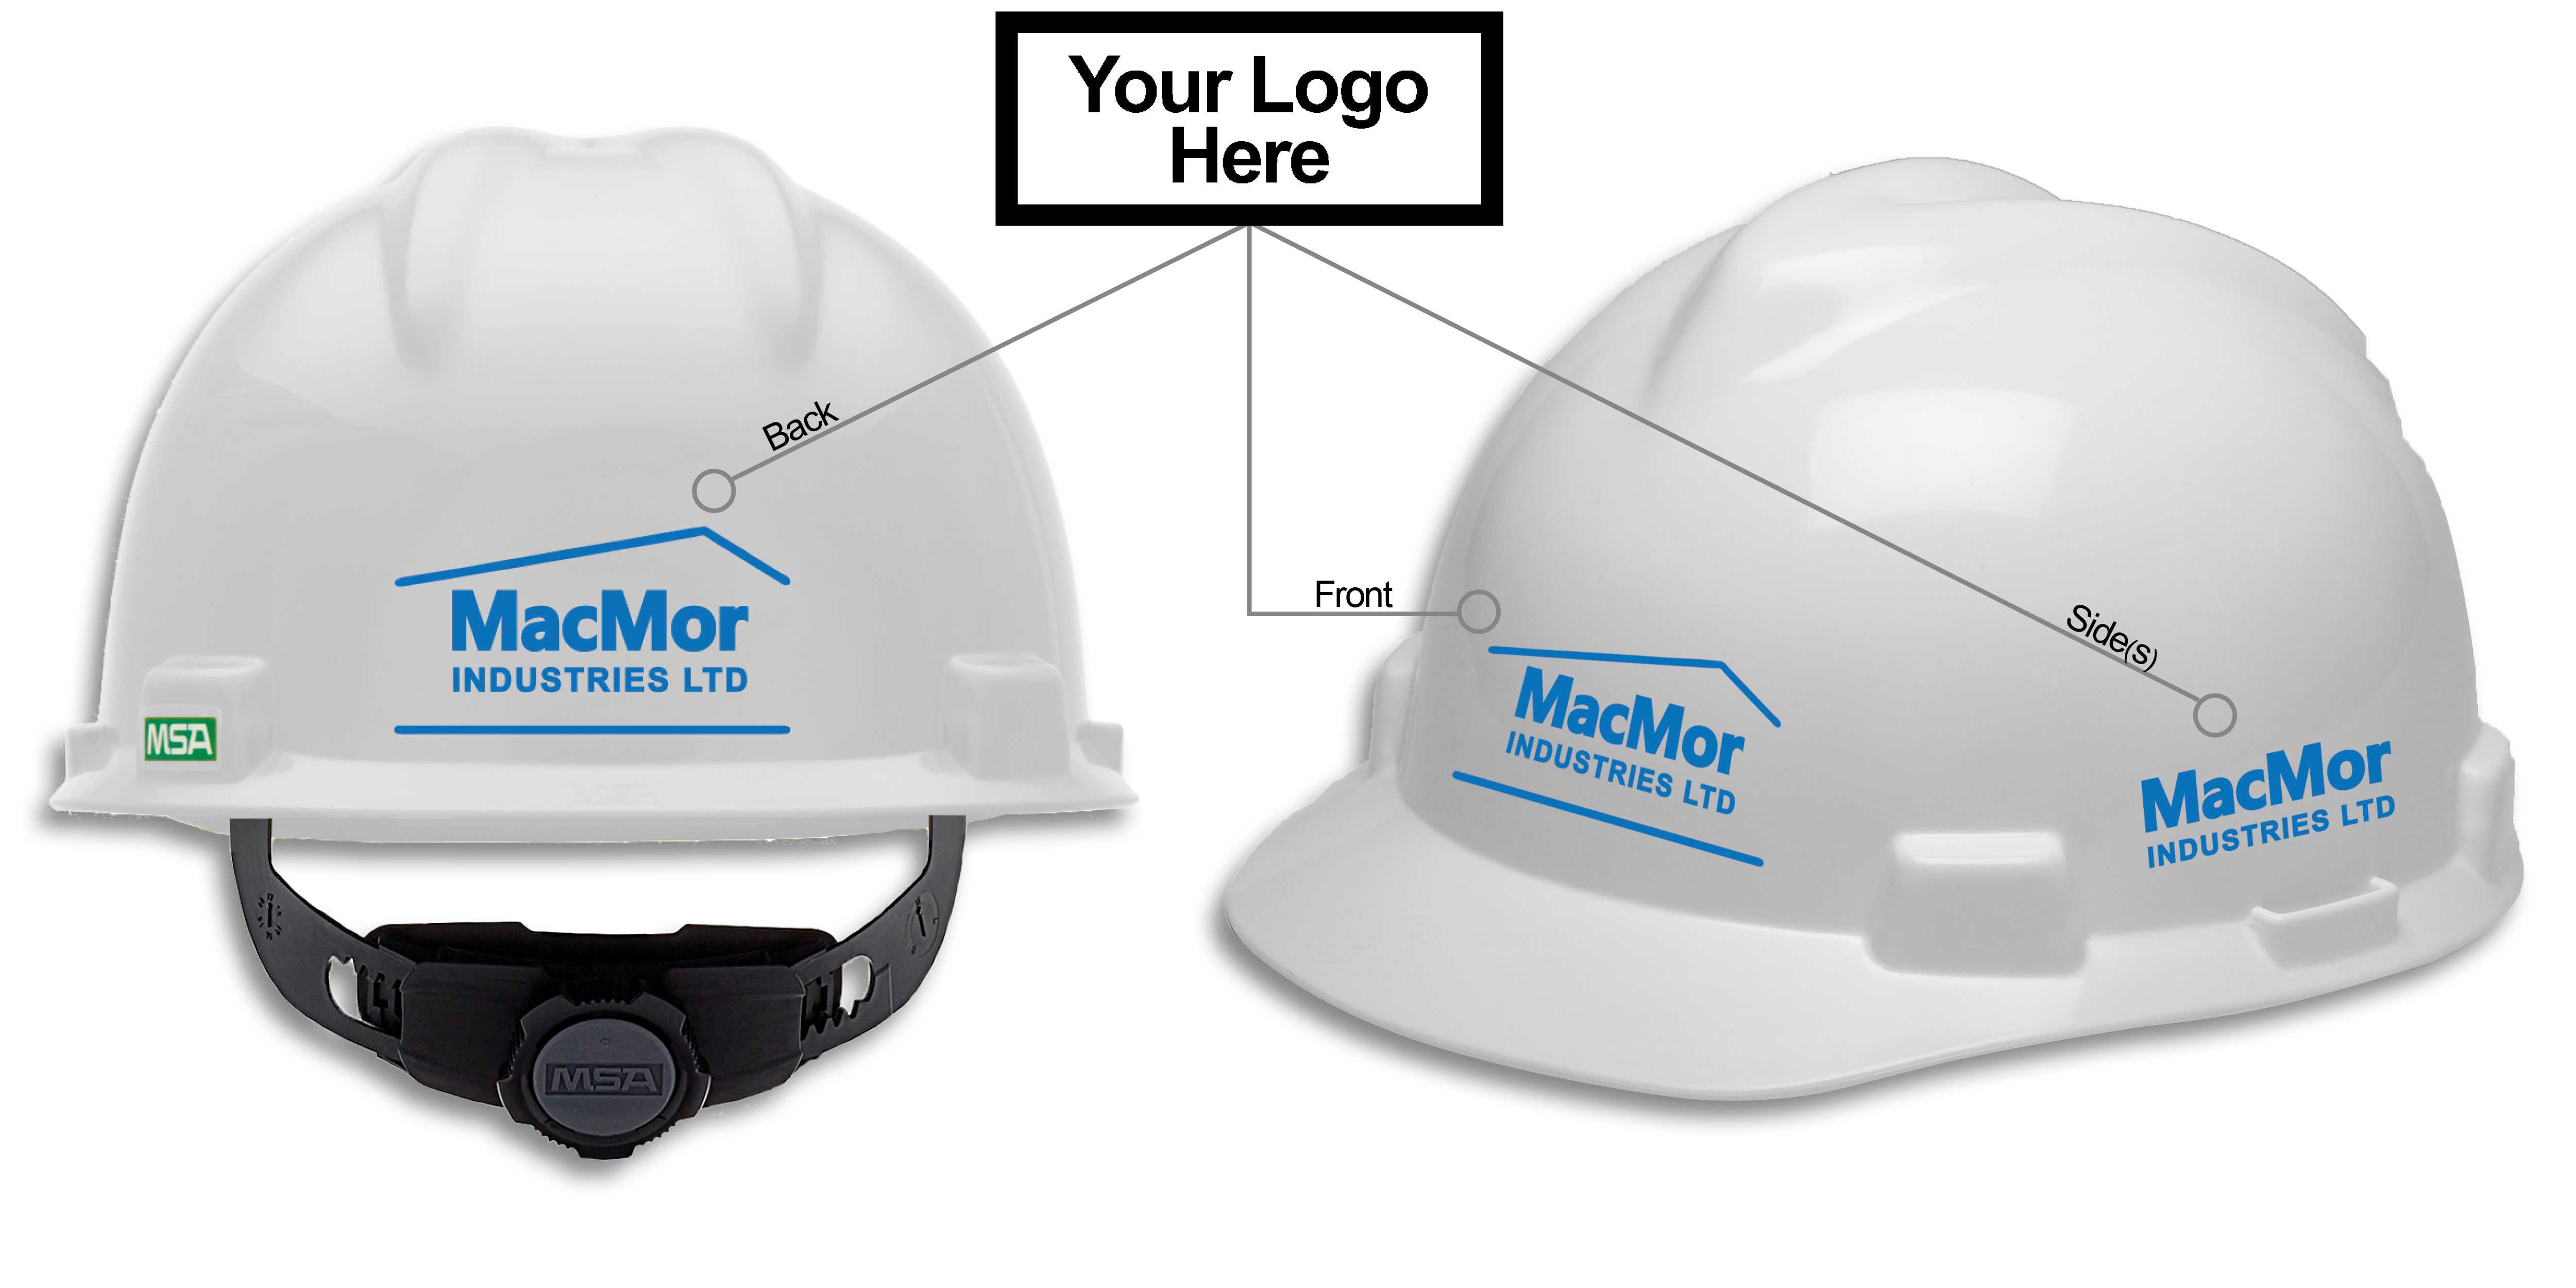 This image shows how MSA's hard hat logo promotion is customizable. Logoing available on the front back and both sides!